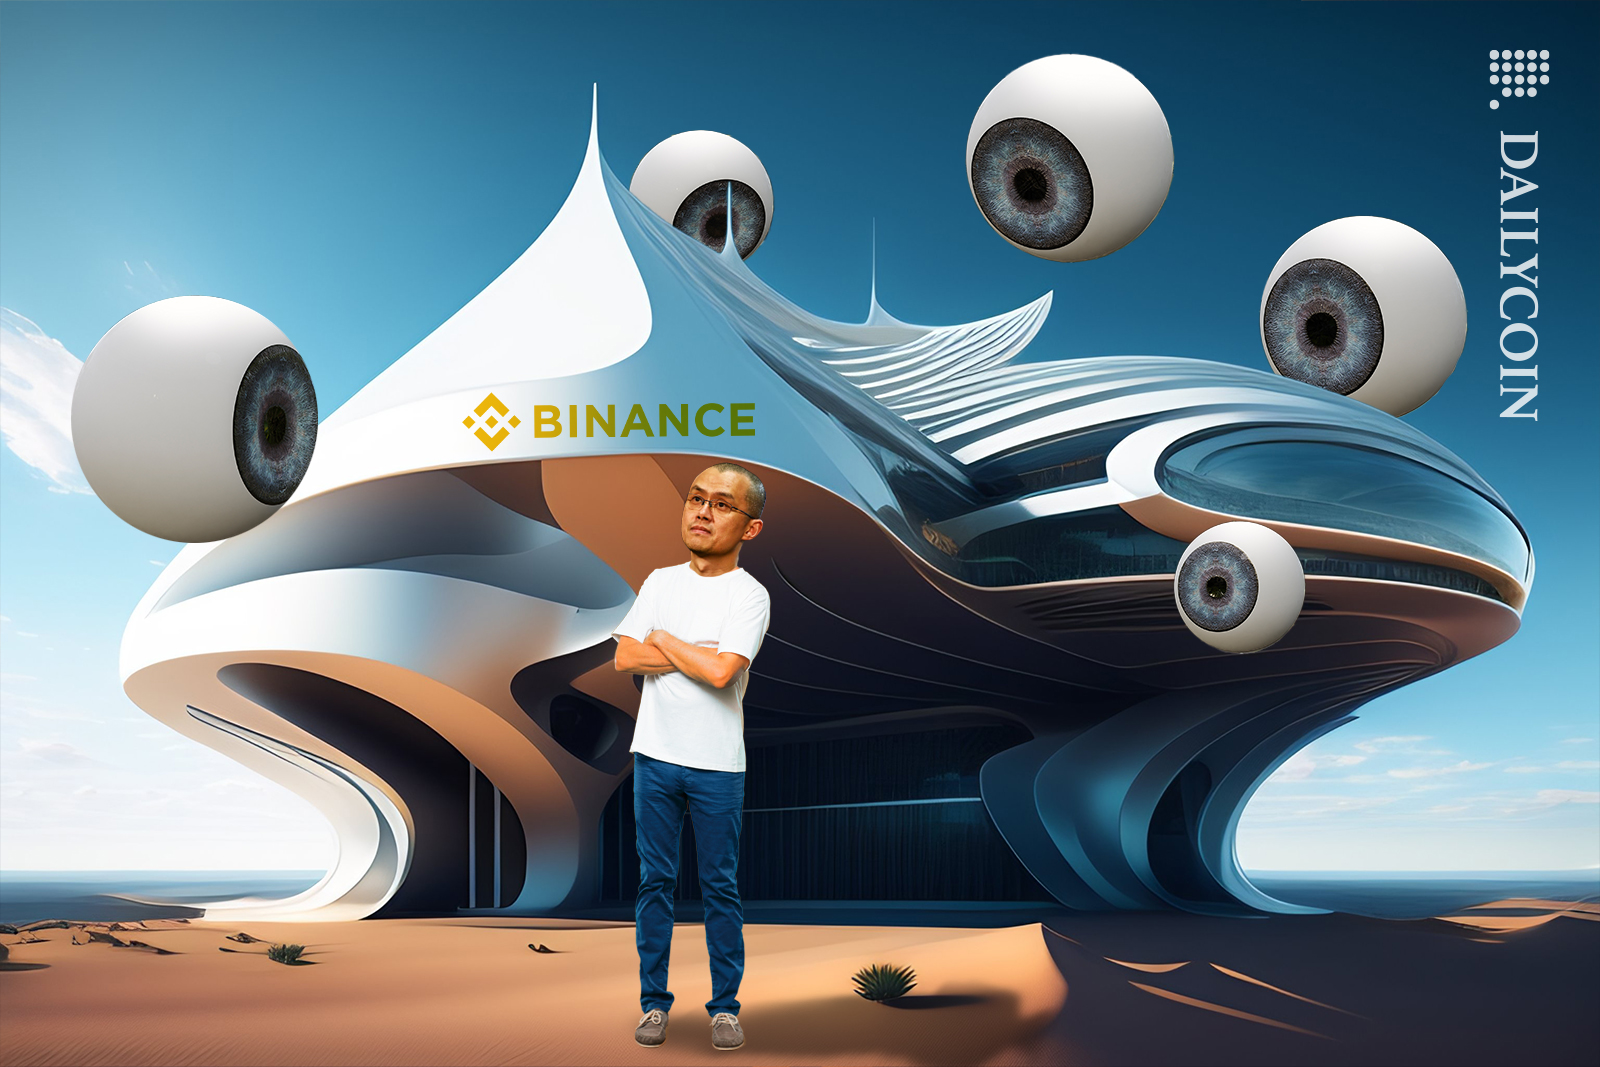 Binance CEO Changpeng Zhao standing next to his office building surrounded by floating eyes.